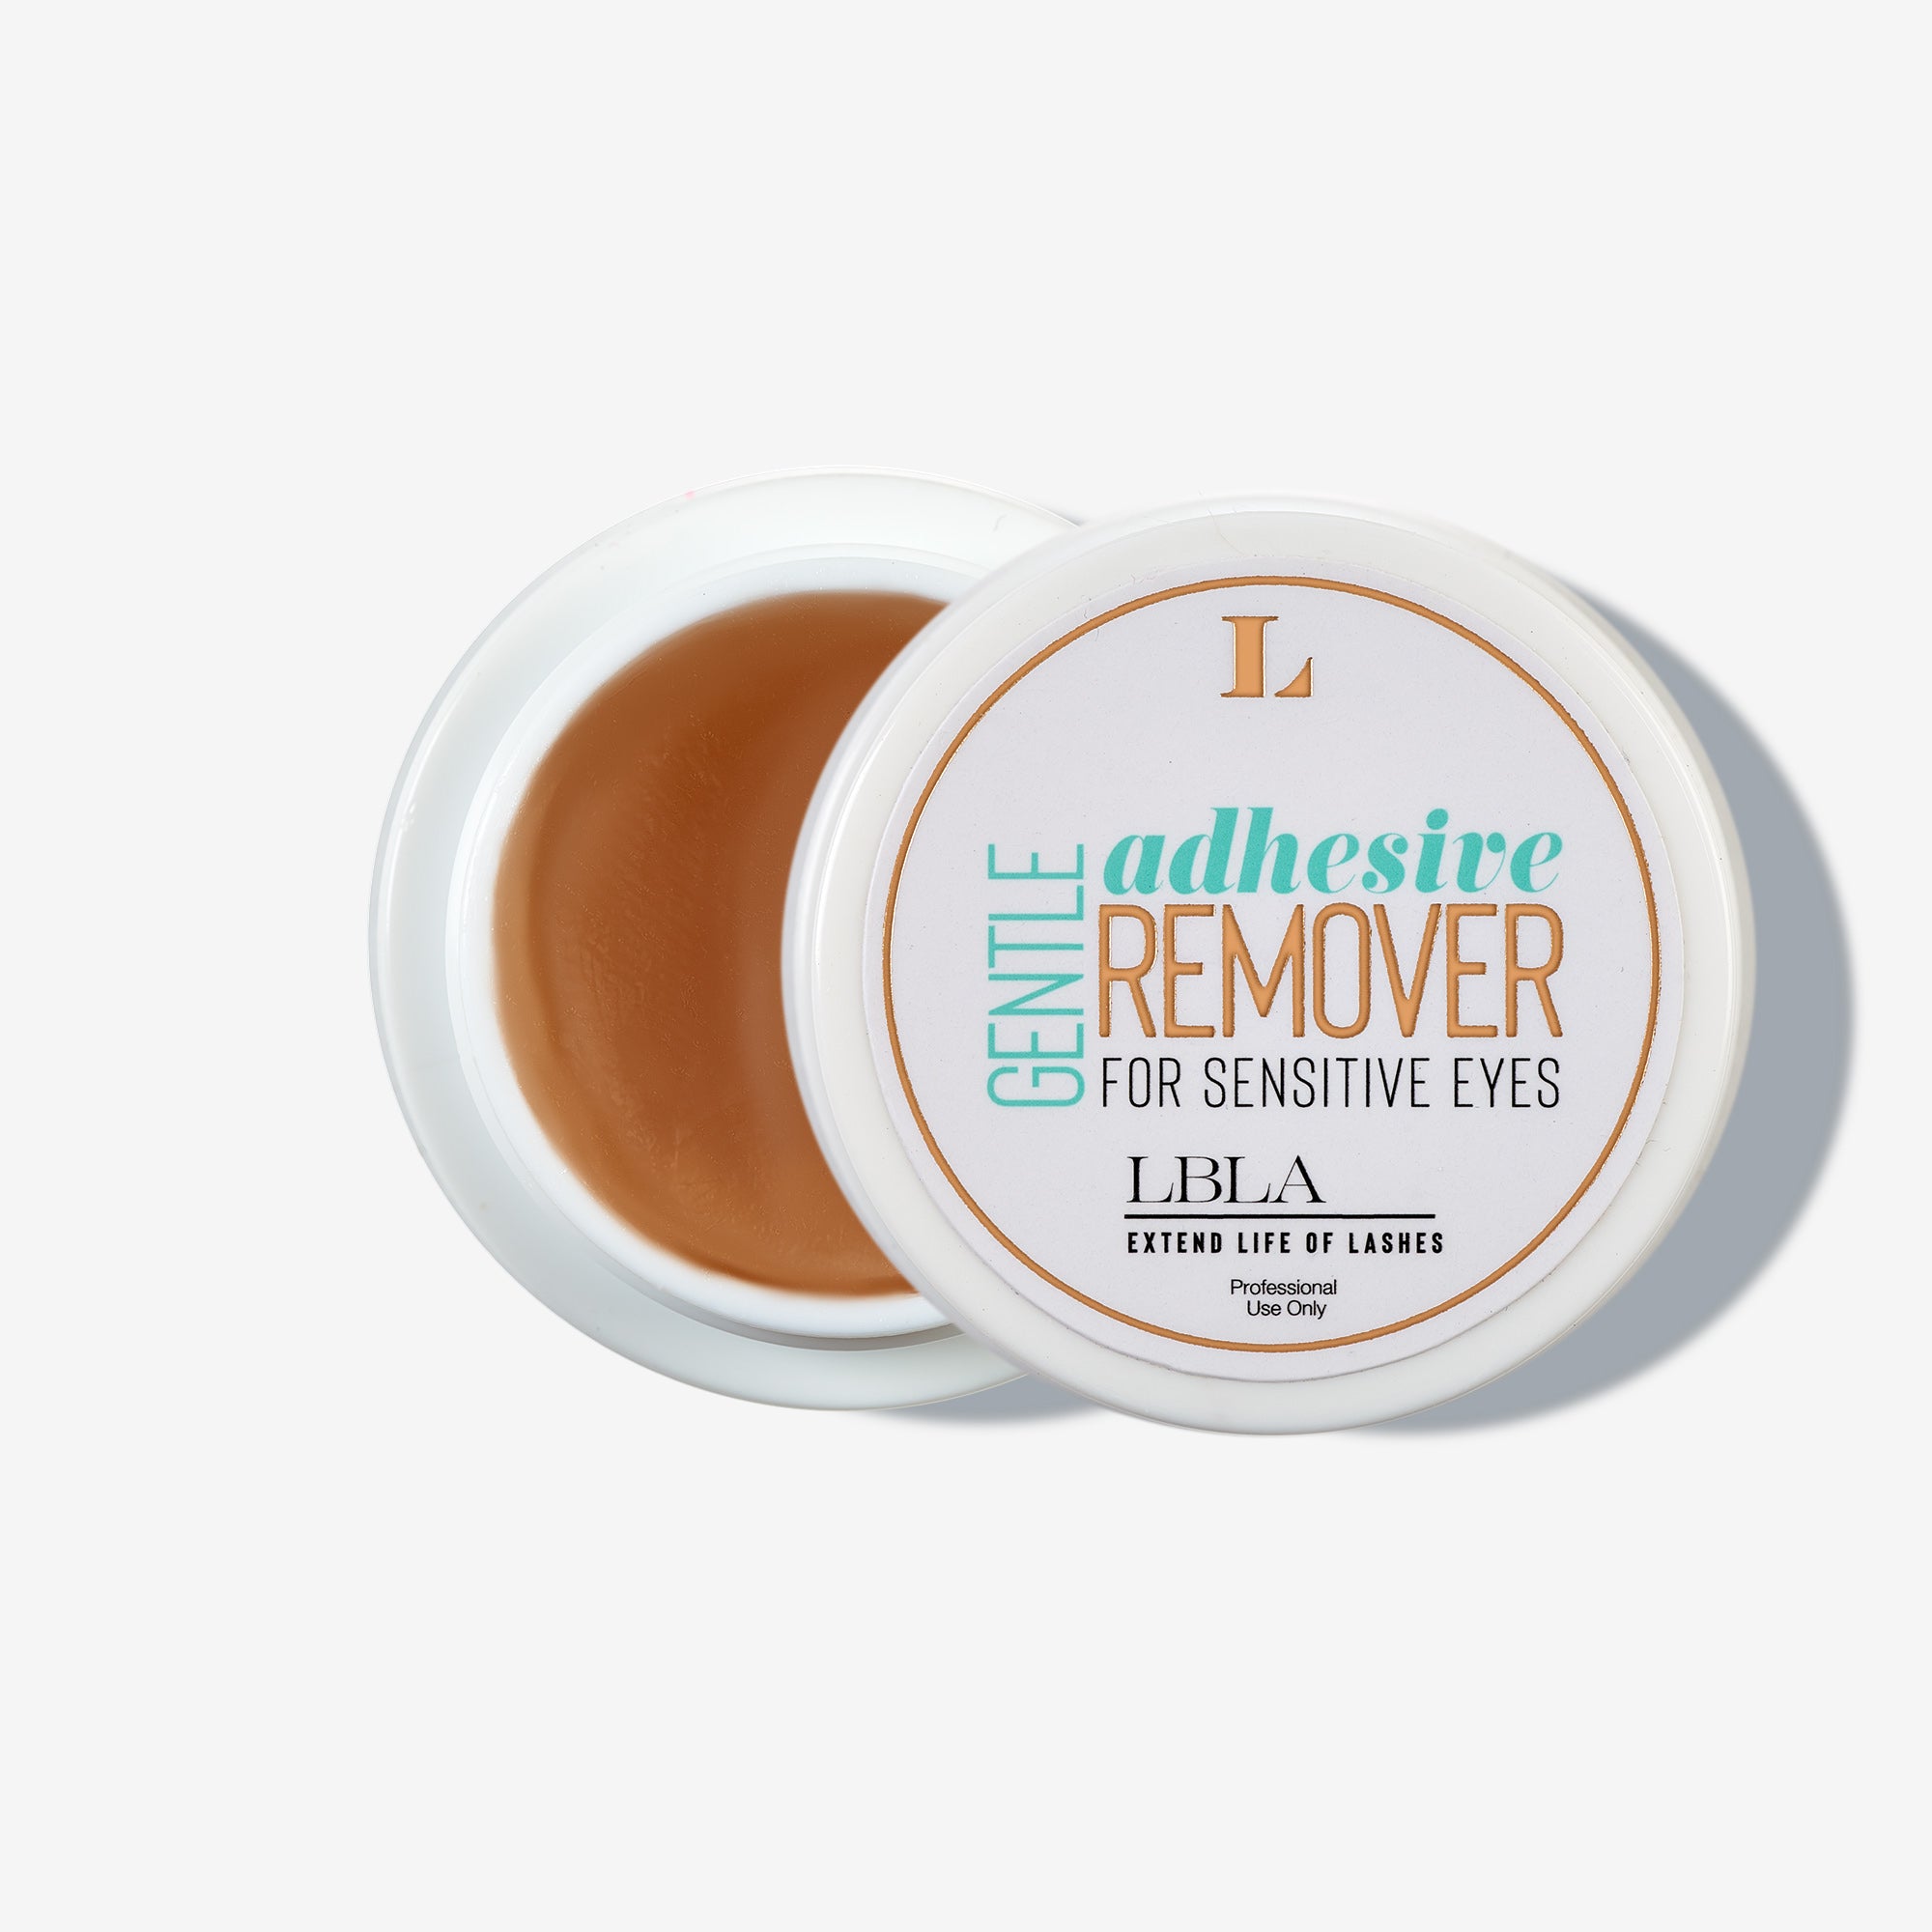 Gentle Adhesive Remover for Sensitive Eyes